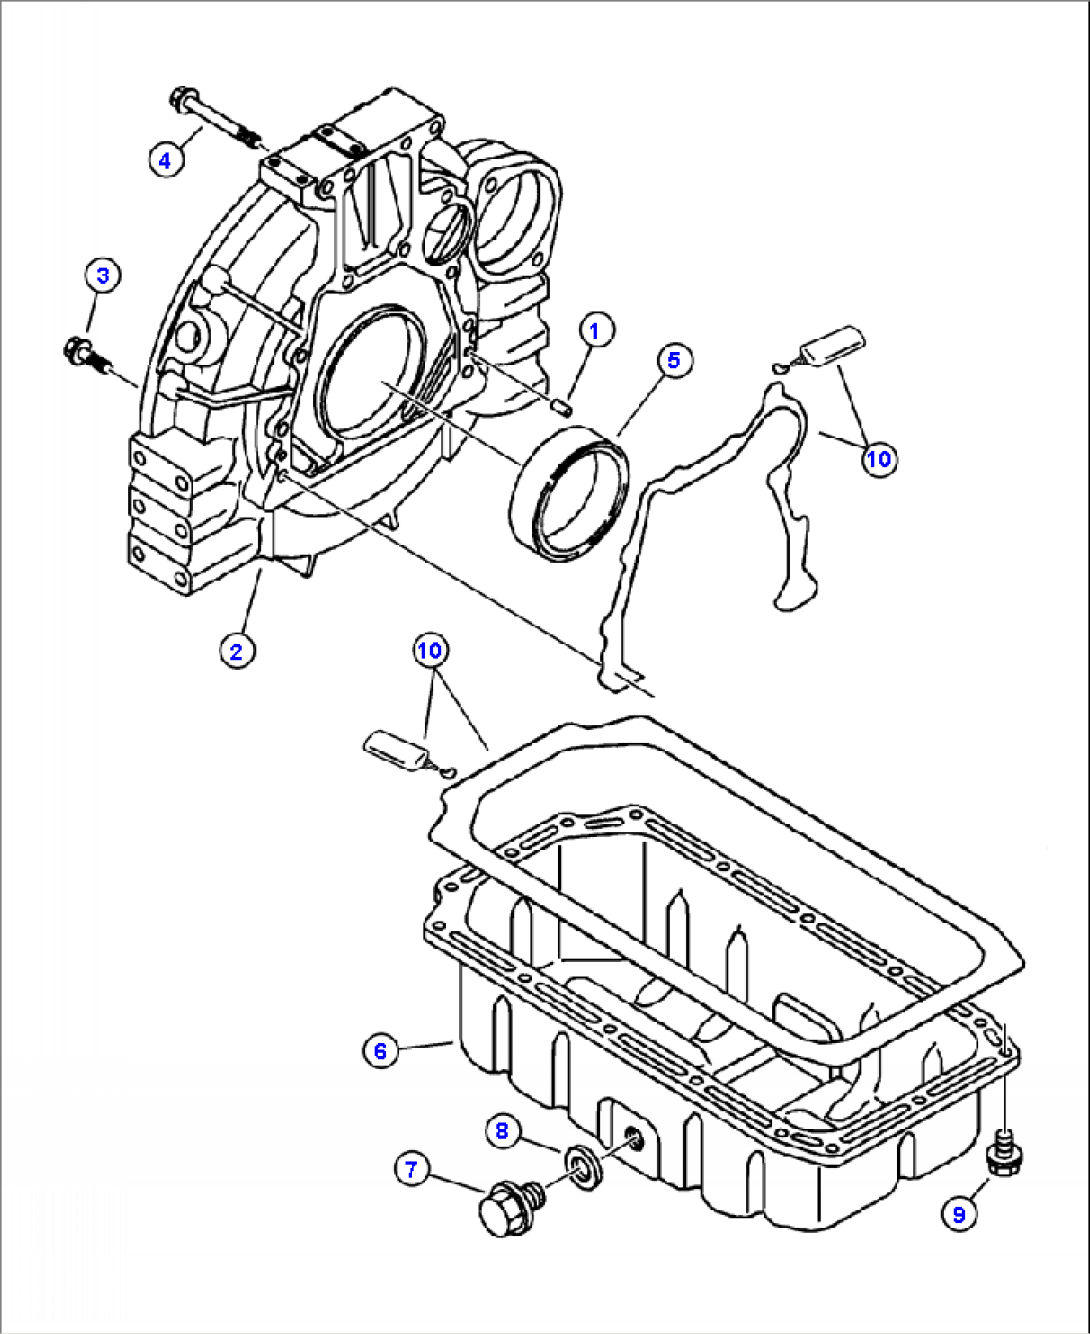 A0005-01A01 FLYWHEEL AND OIL PAN